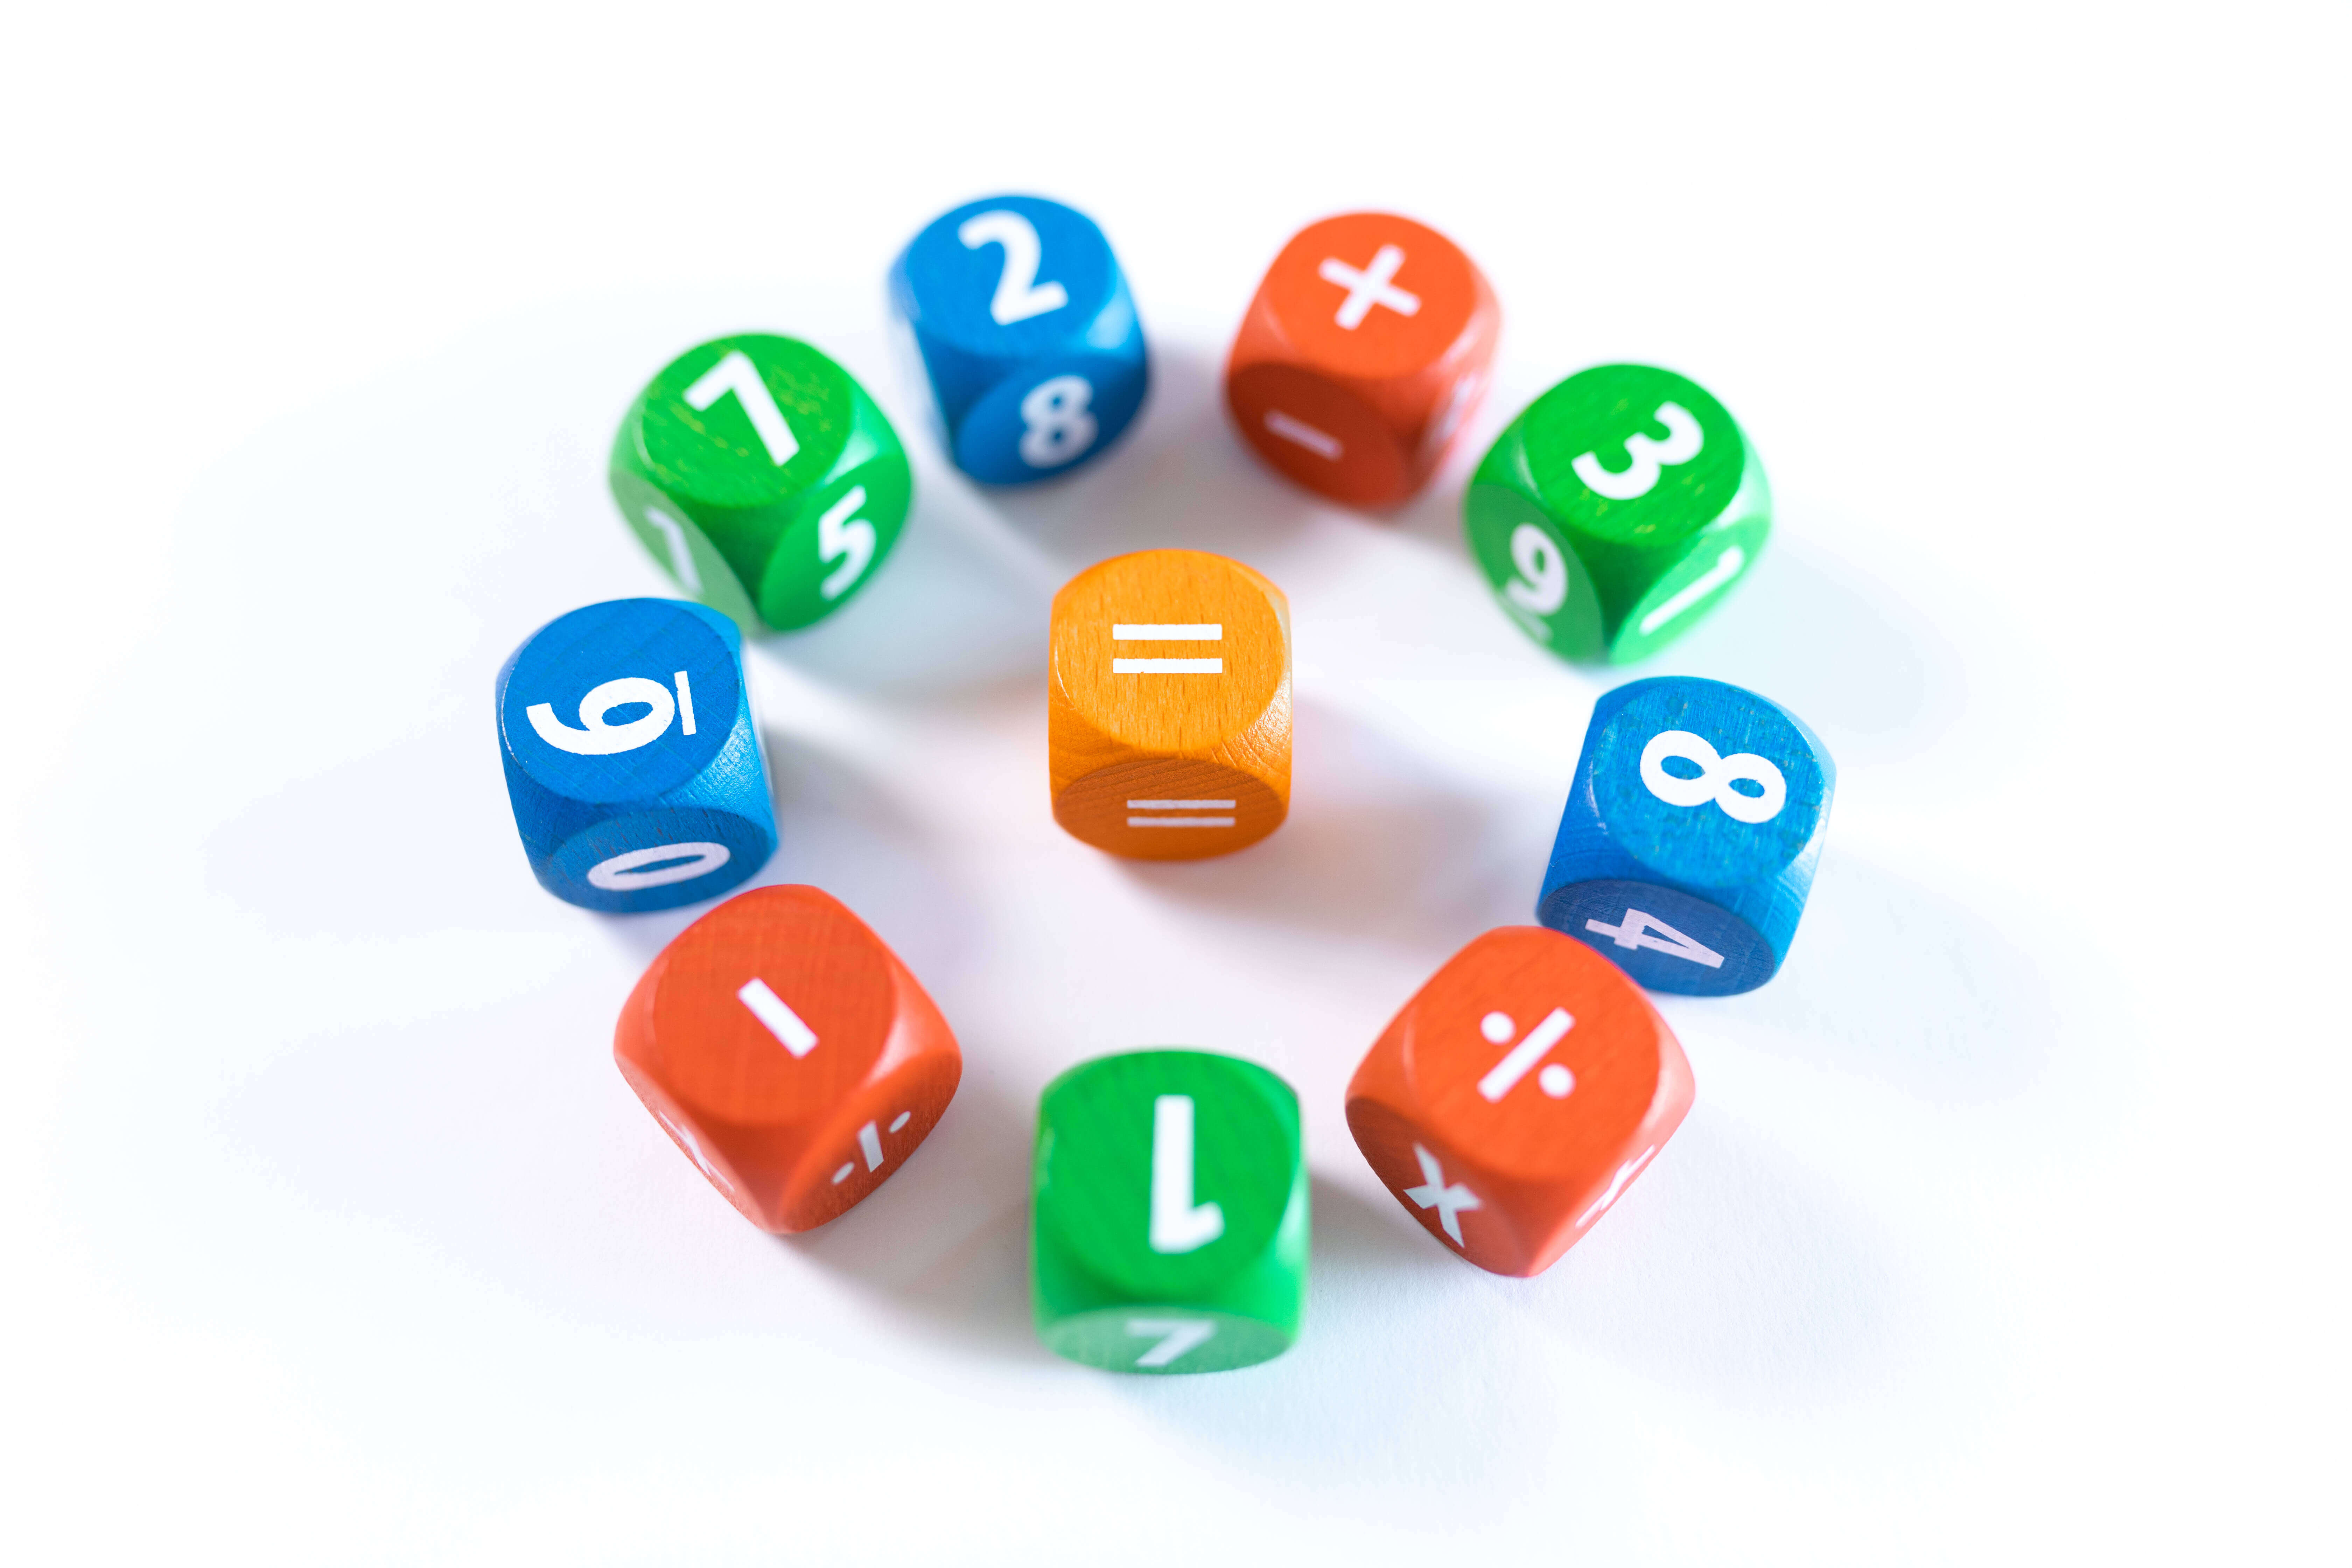 Make math fun with these colored dice with numbers and symbols